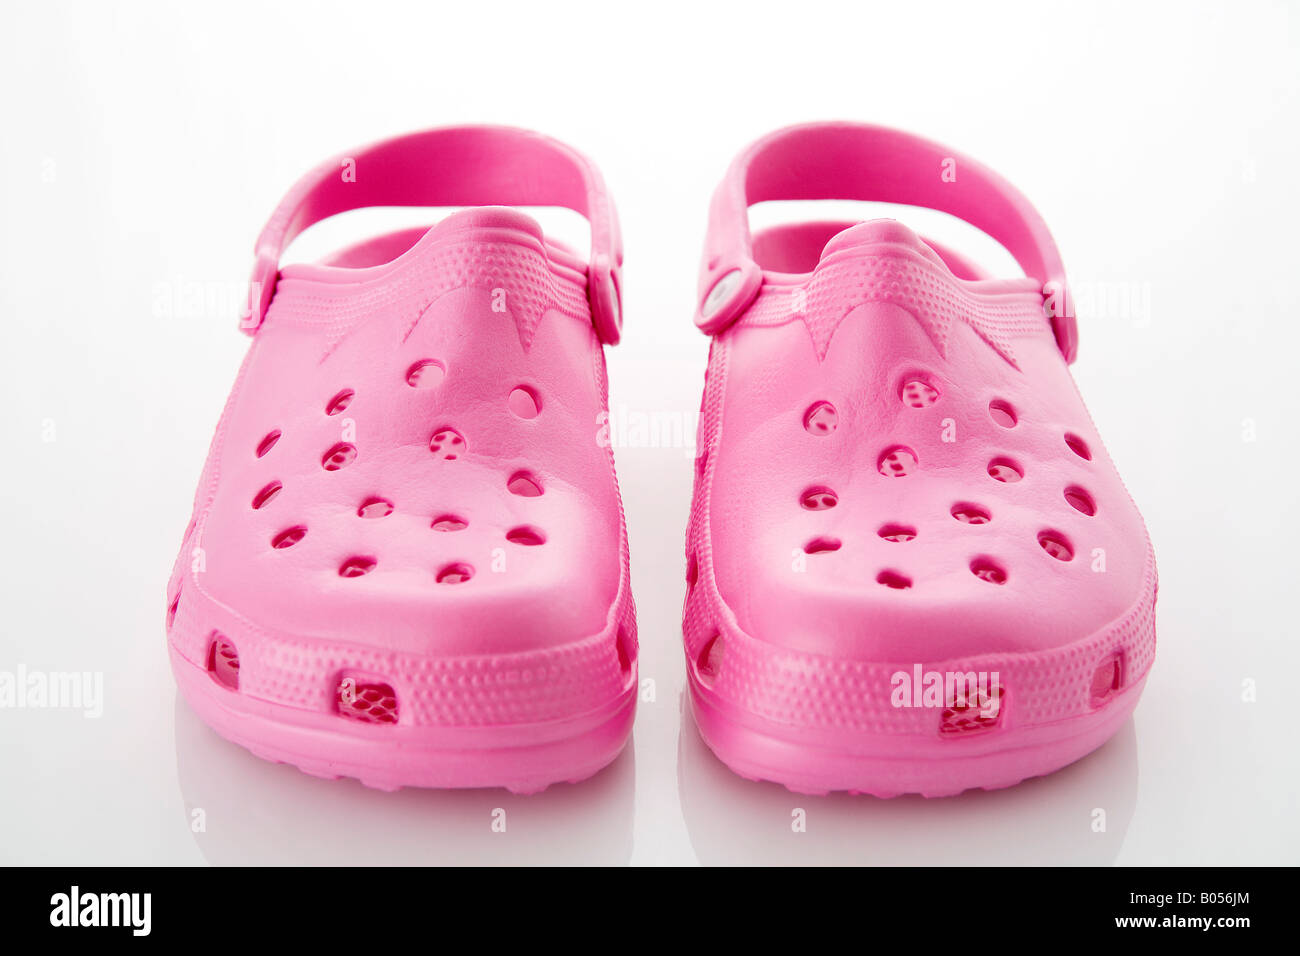 Crocs High Resolution Stock Photography and Images - Alamy